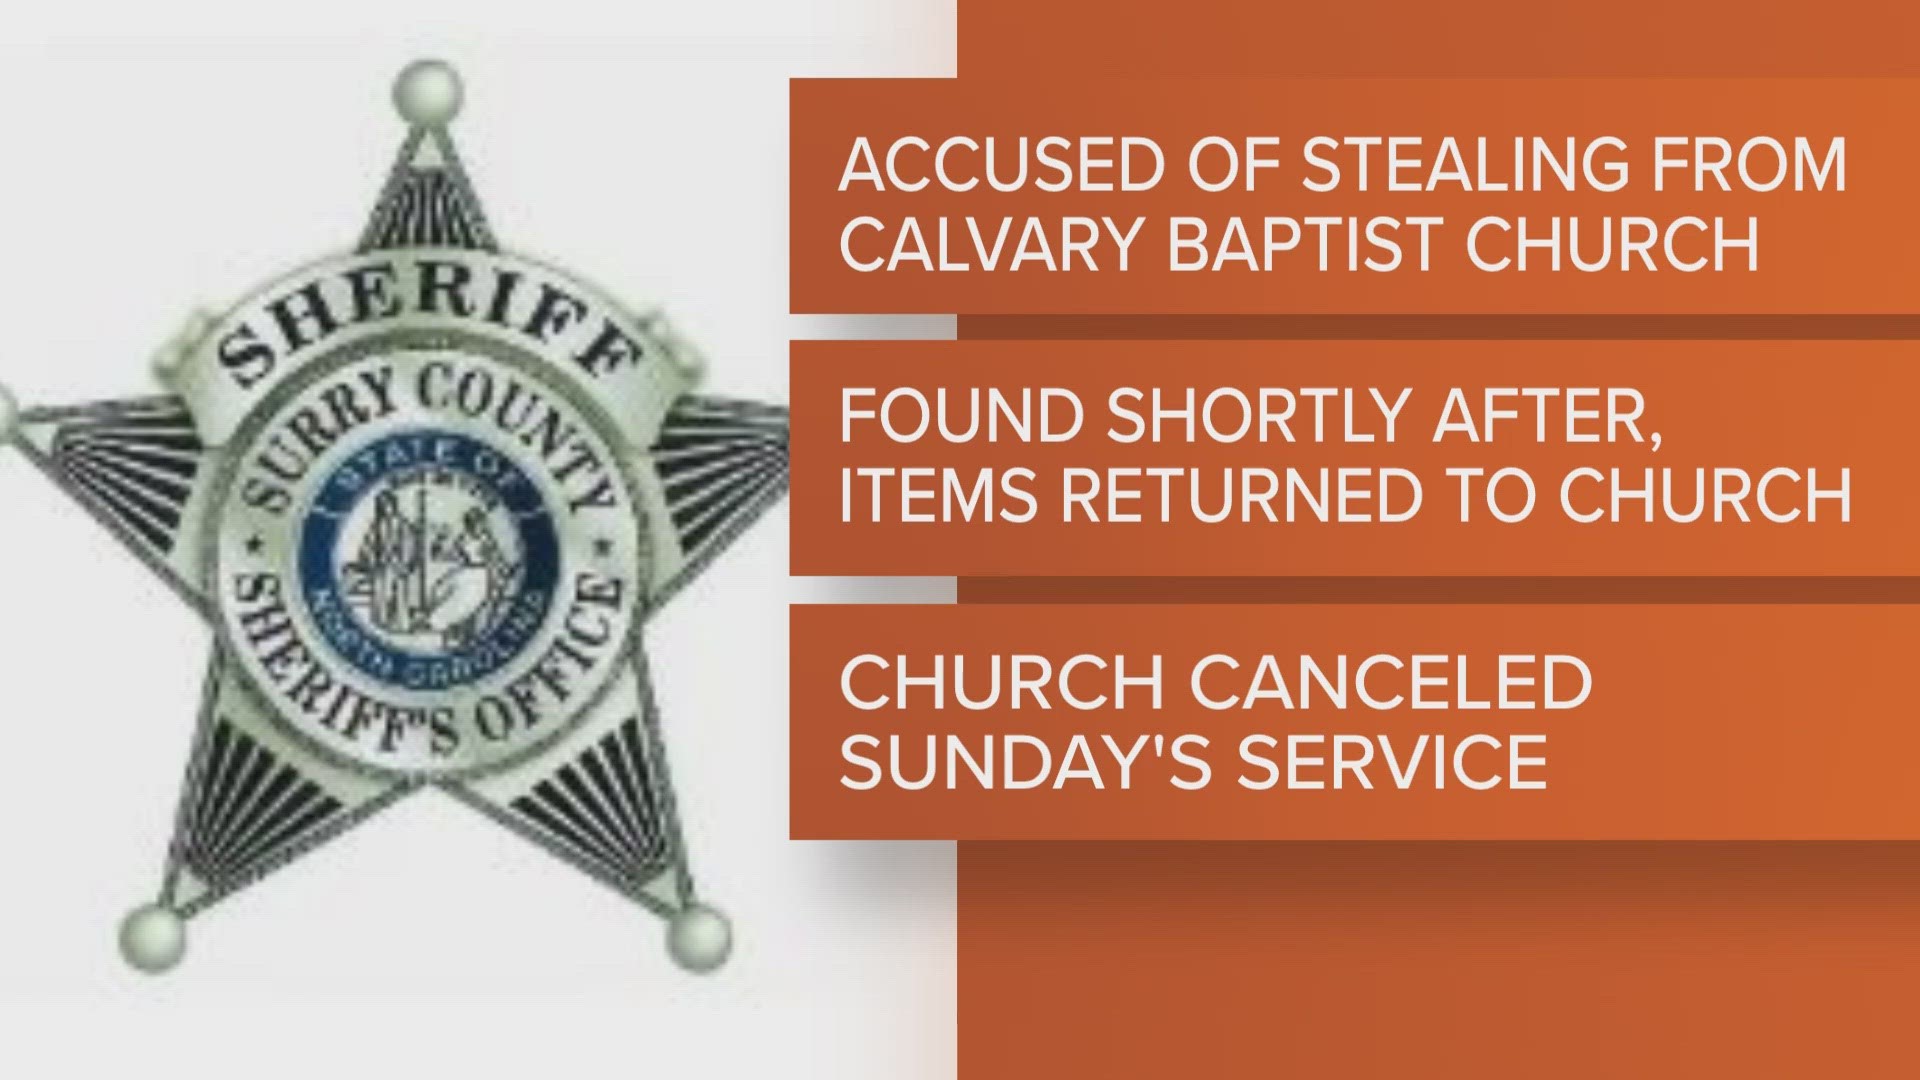 Investigators say a man damaged doors, windows, and walls while stealing items from the church.